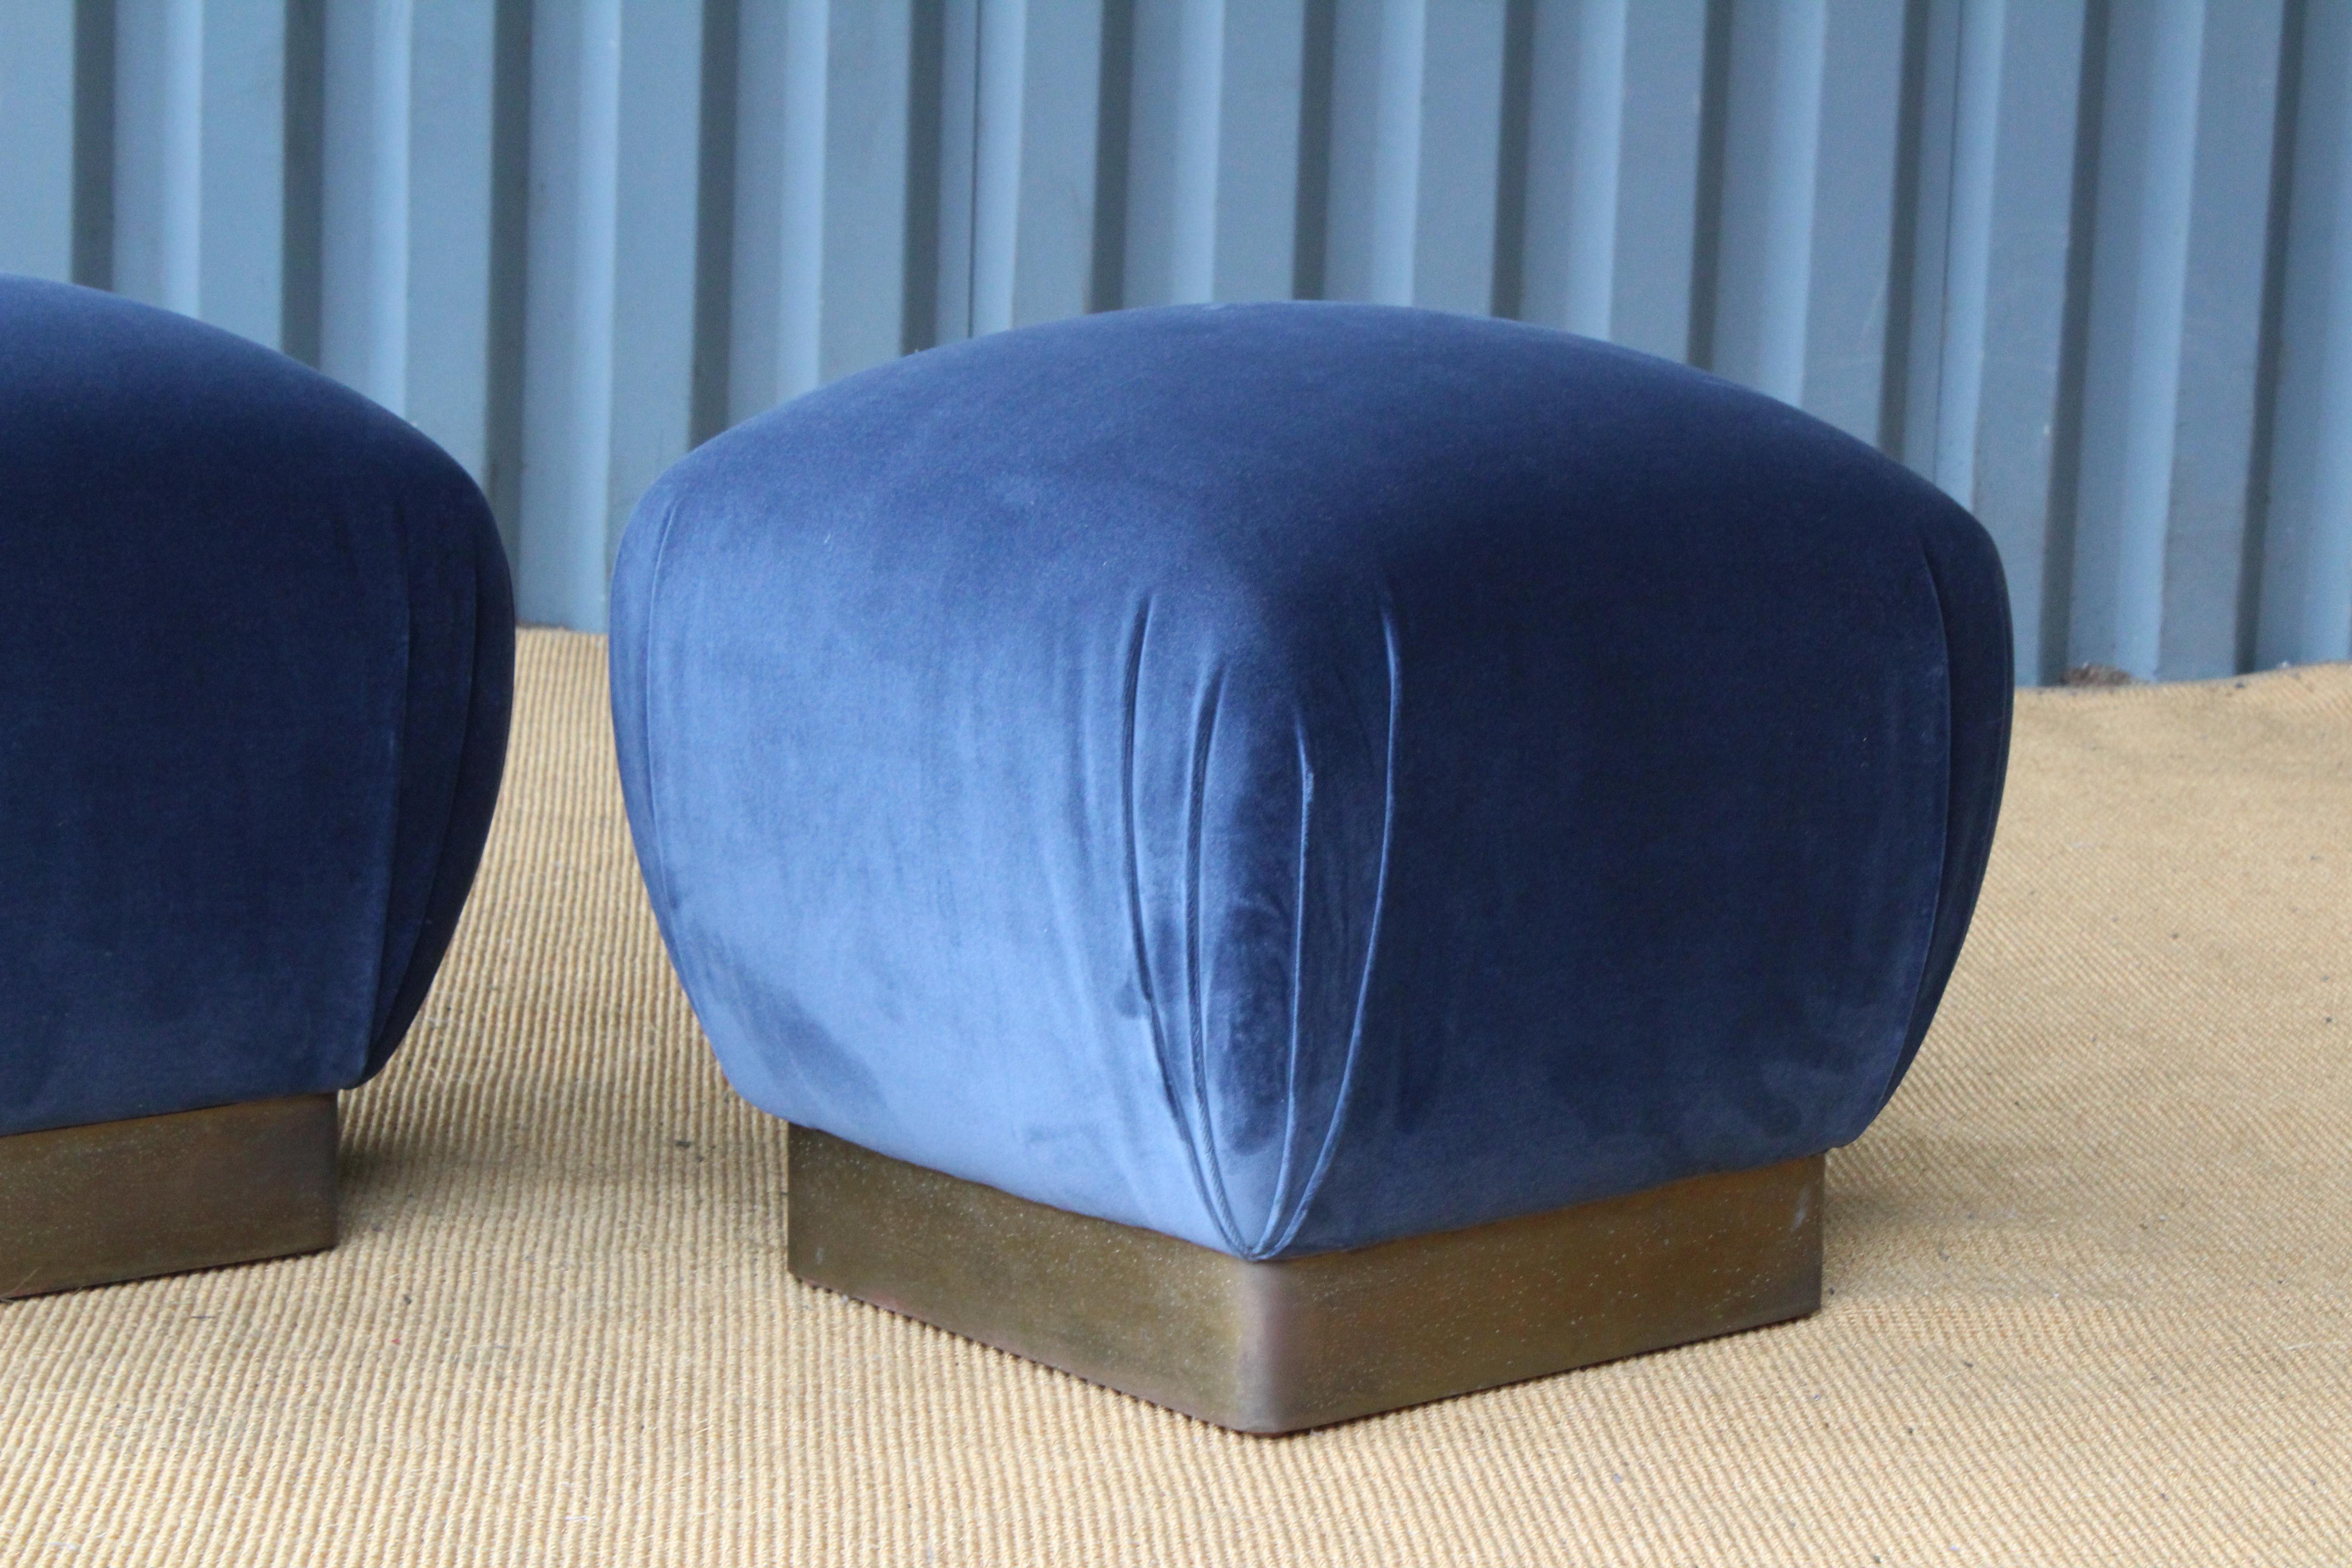 Pair of Ottomans or Stools in the Style of Karl Springer, 1970s (Ende des 20. Jahrhunderts)